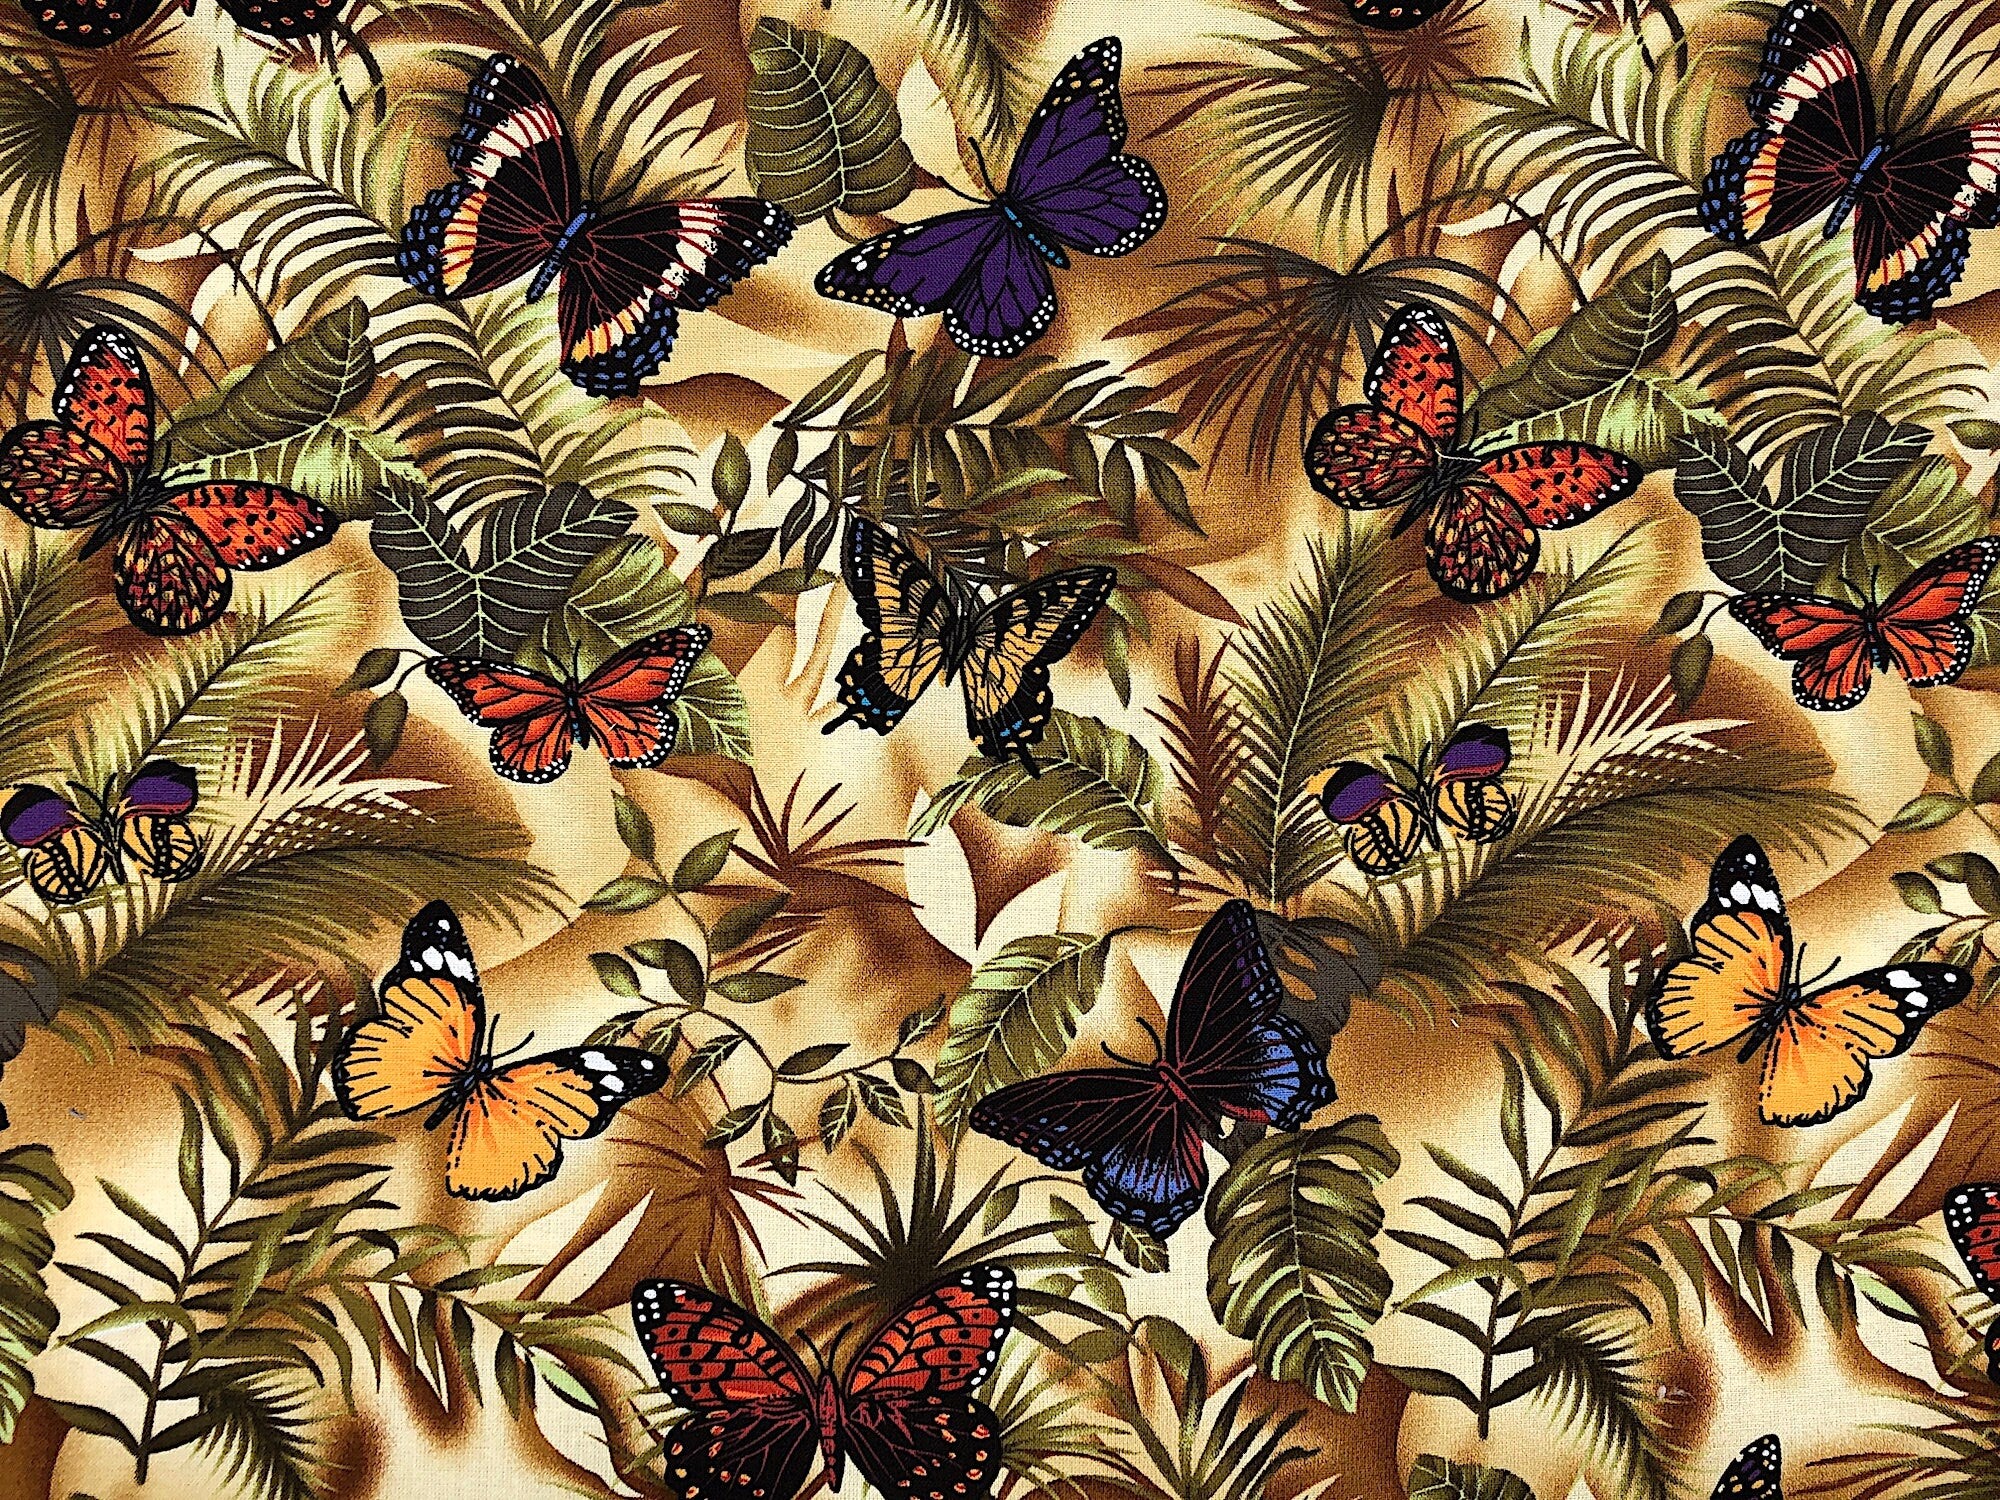 This fabric is covered with butterflies and leaves. The butterflies are shades of orange, yellow, cream and purple.